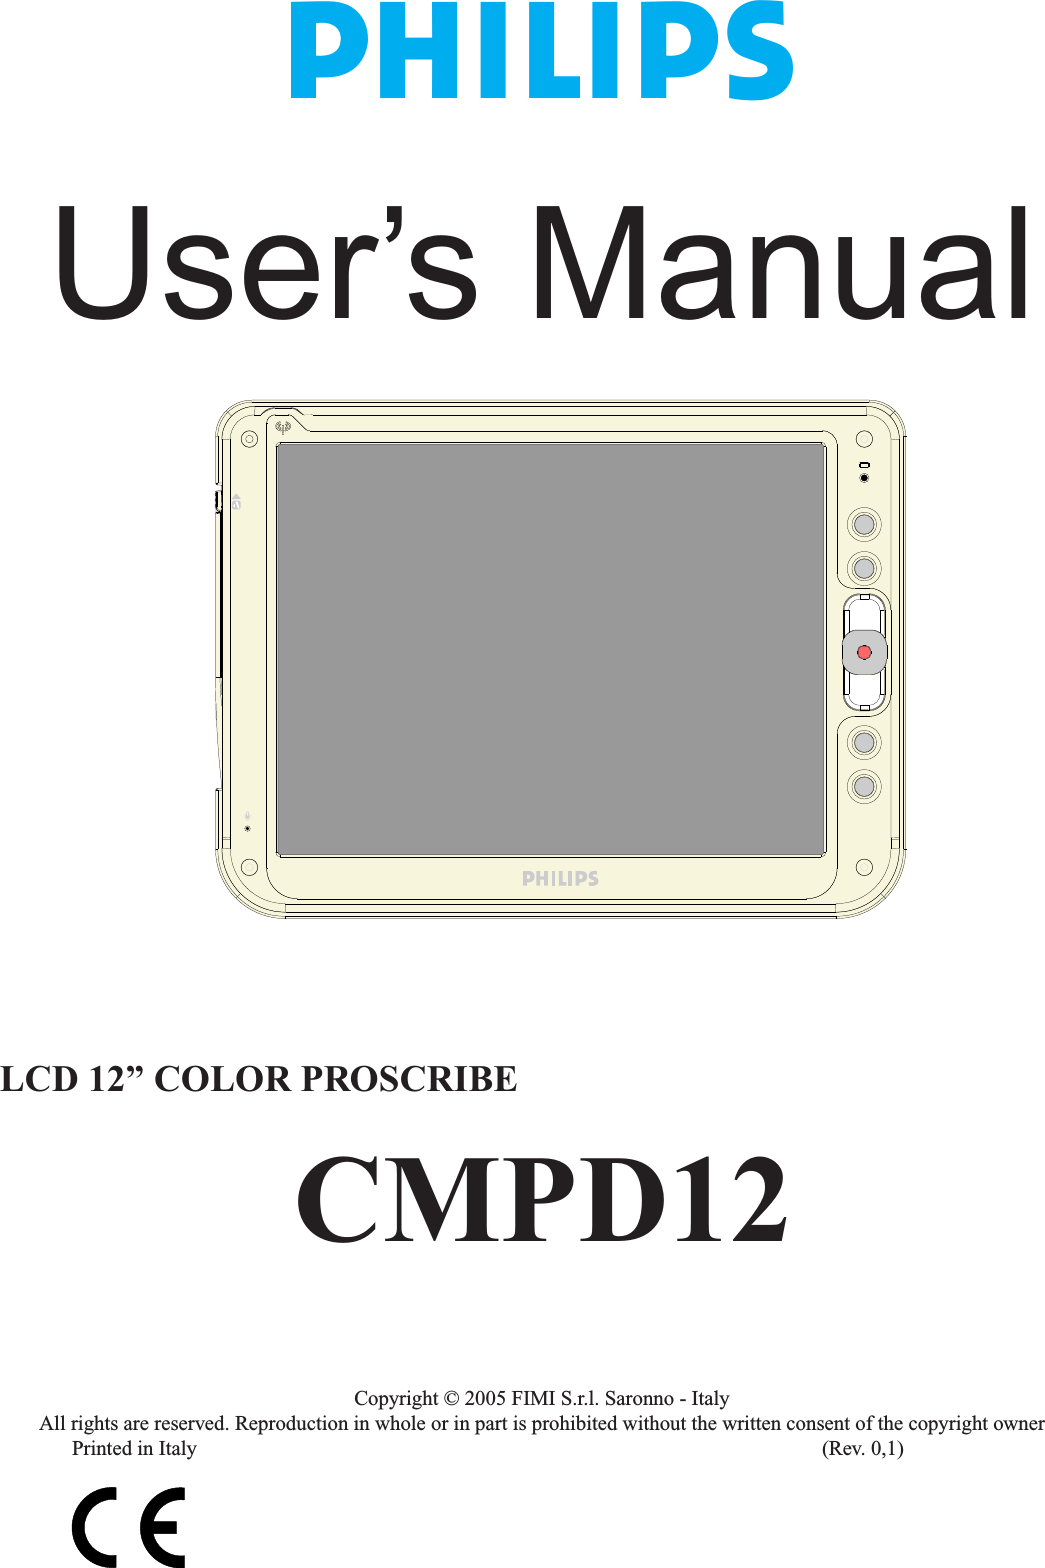 User’s ManualLCD 12” COLOR PROSCRIBE CMPD12Copyright © 2005 FIMI S.r.l. Saronno - ItalyAll rights are reserved. Reproduction in whole or in part is prohibited without the written consent of the copyright owner  Printed in Italy                     (Rev. 0,1)W